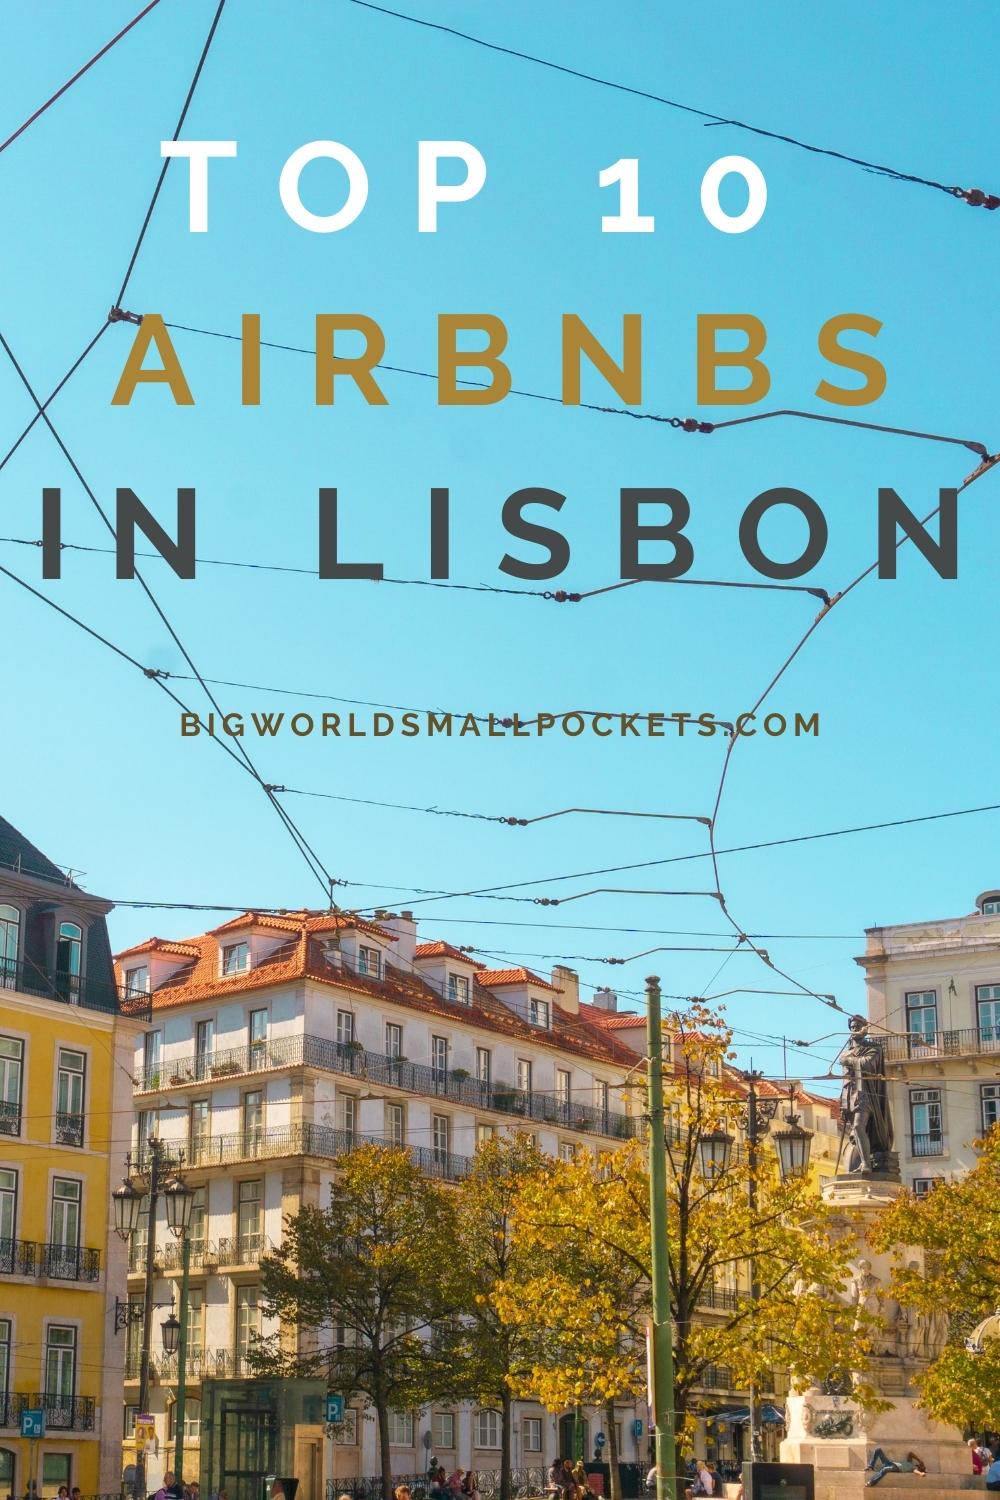 Top 10 Airbnbs in Lisbon, Portugal